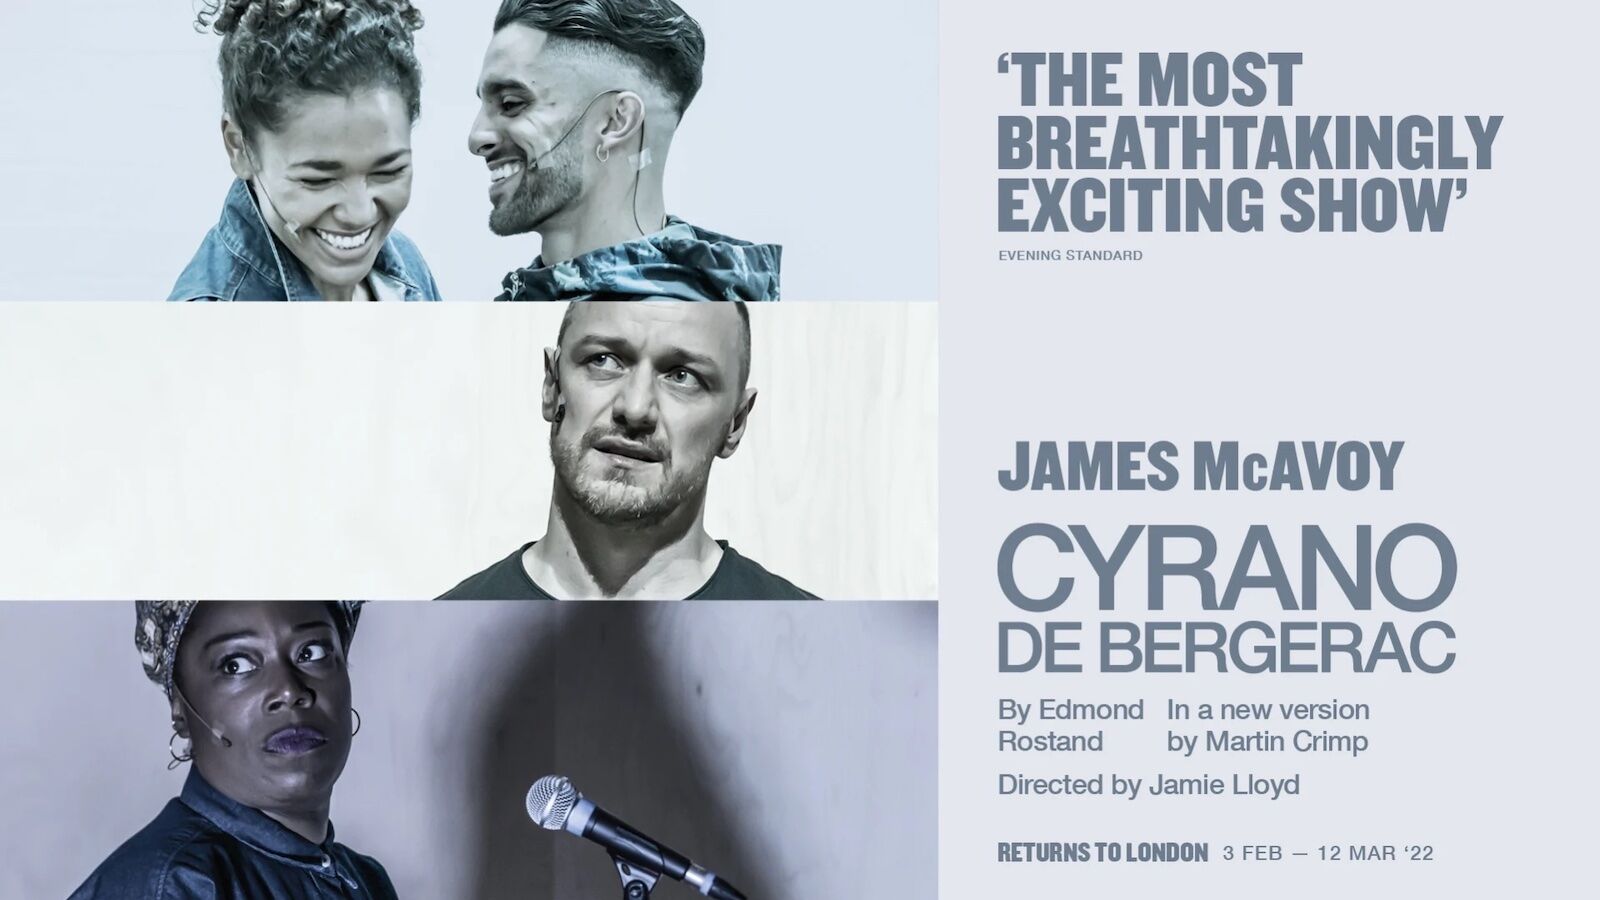 Poster for "Cyrano de Bergerac", one of the best London shows in 2022